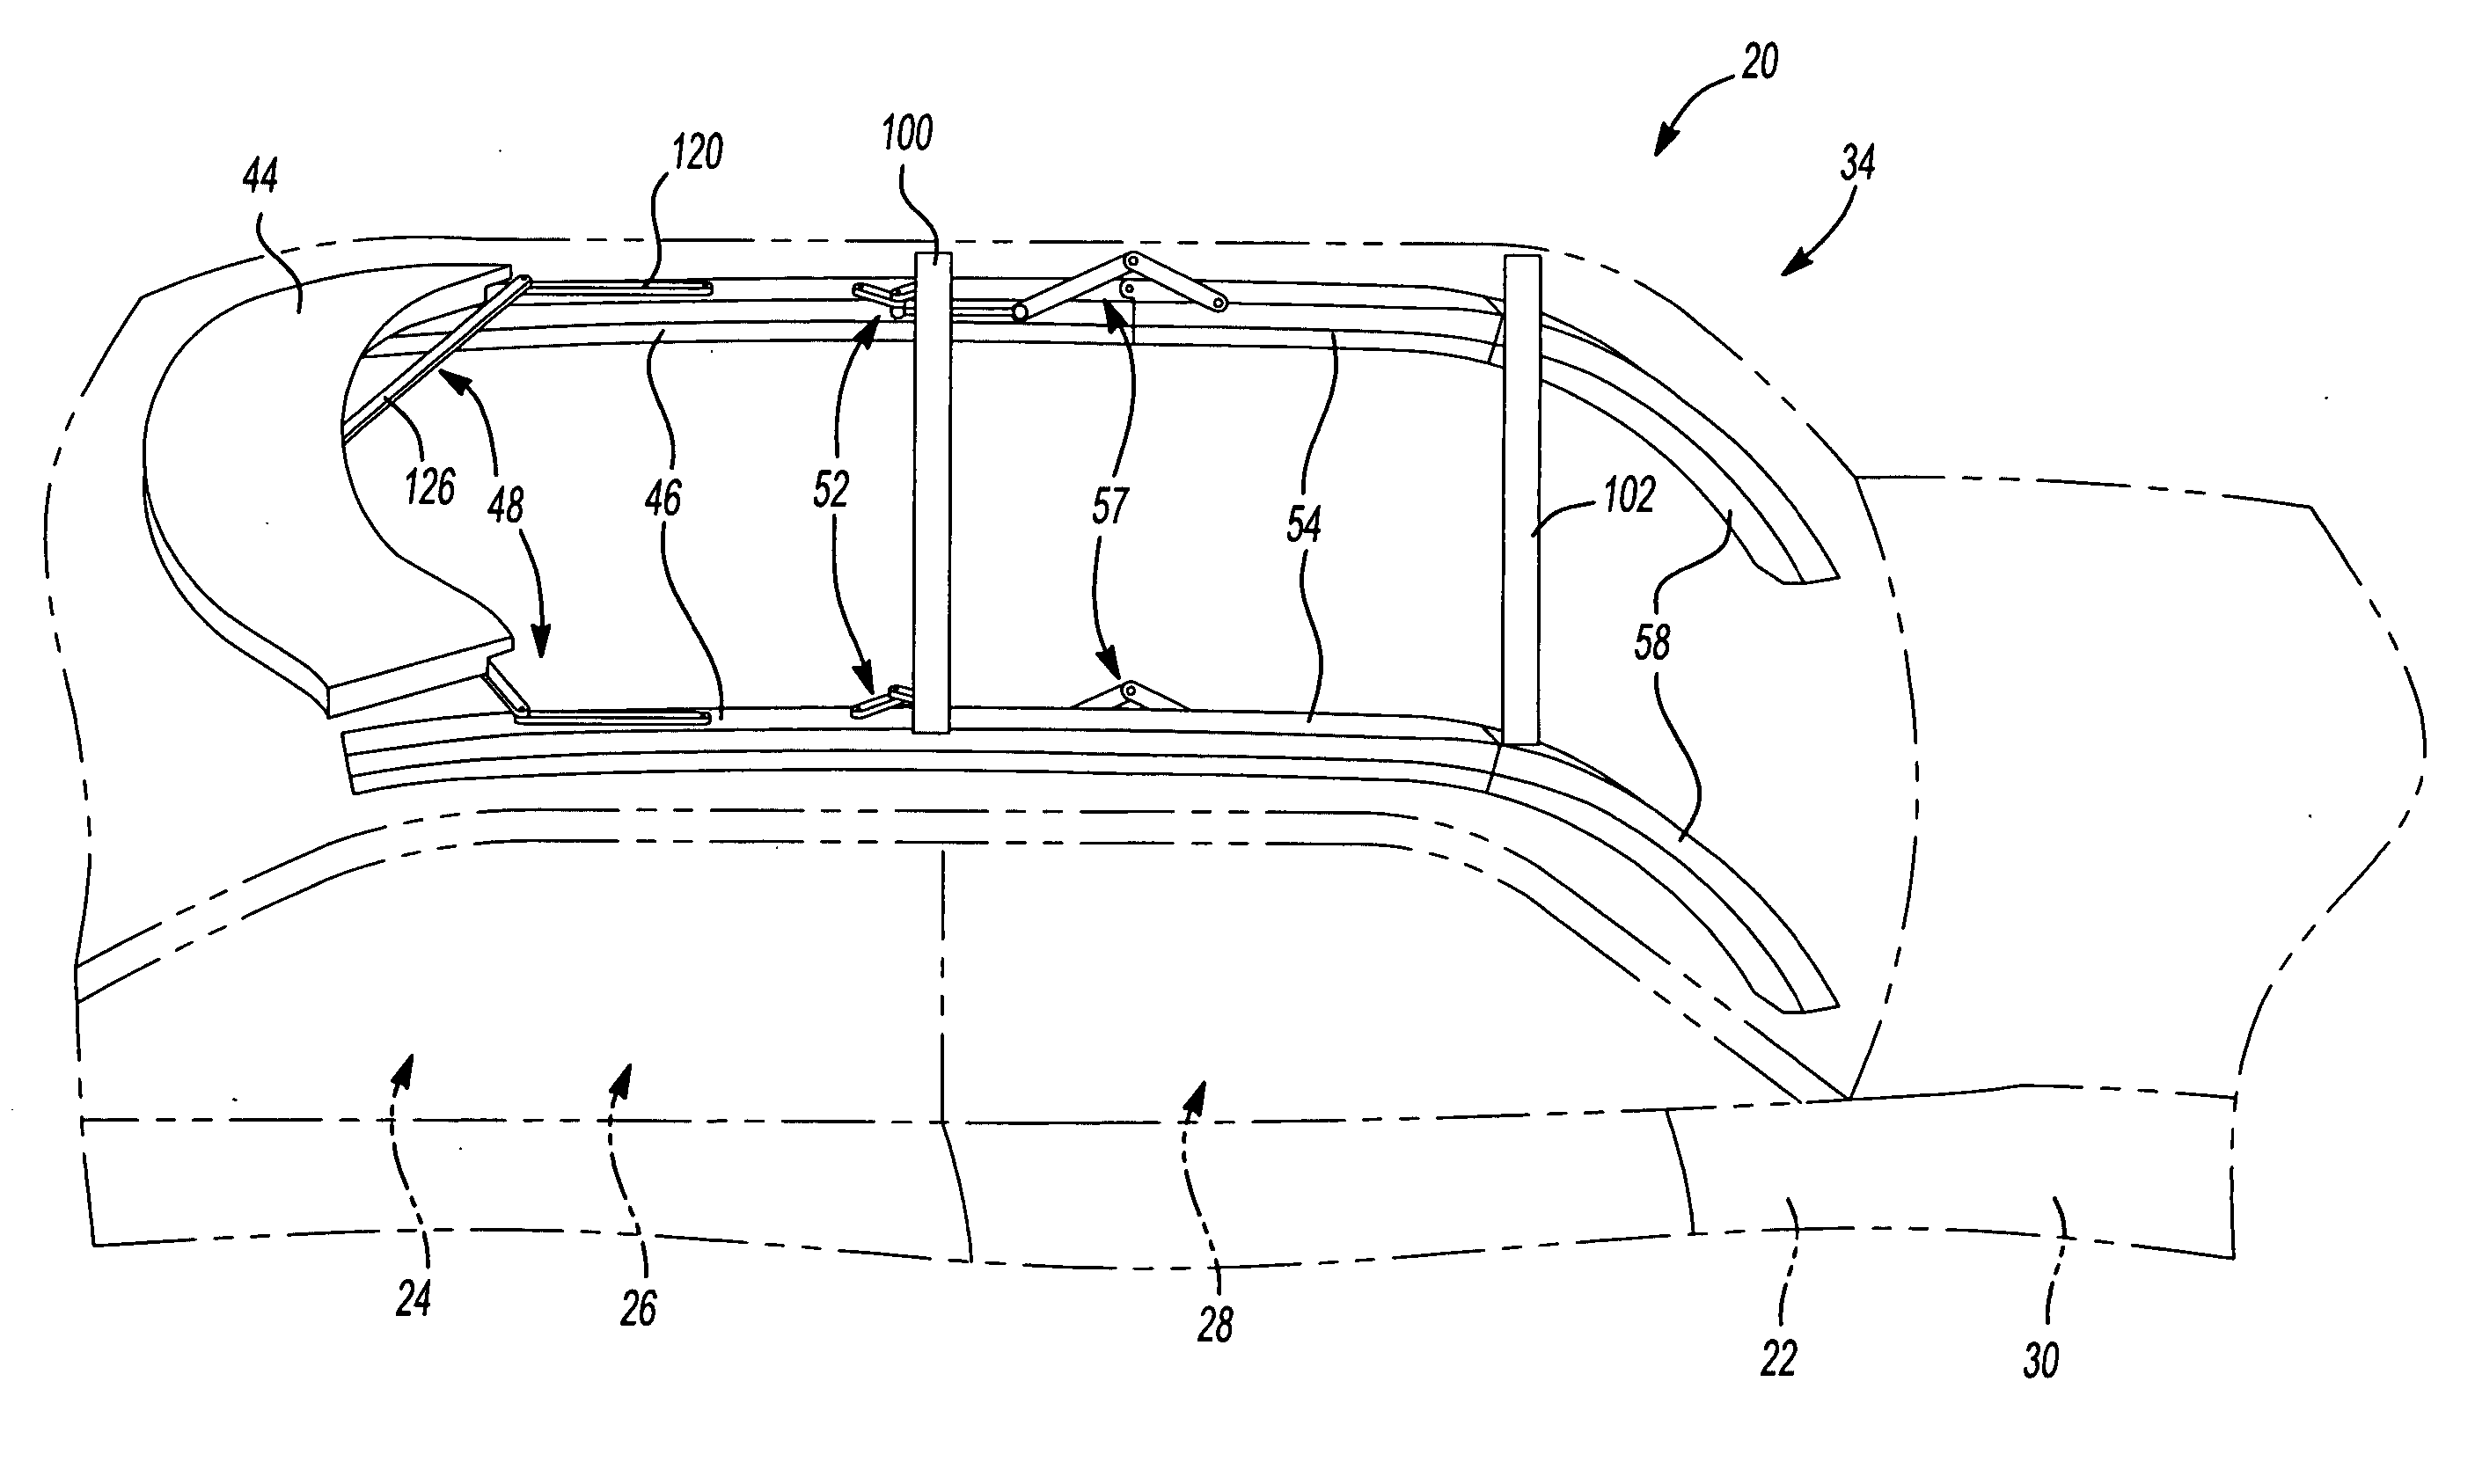 Convertible roof system with dampening device